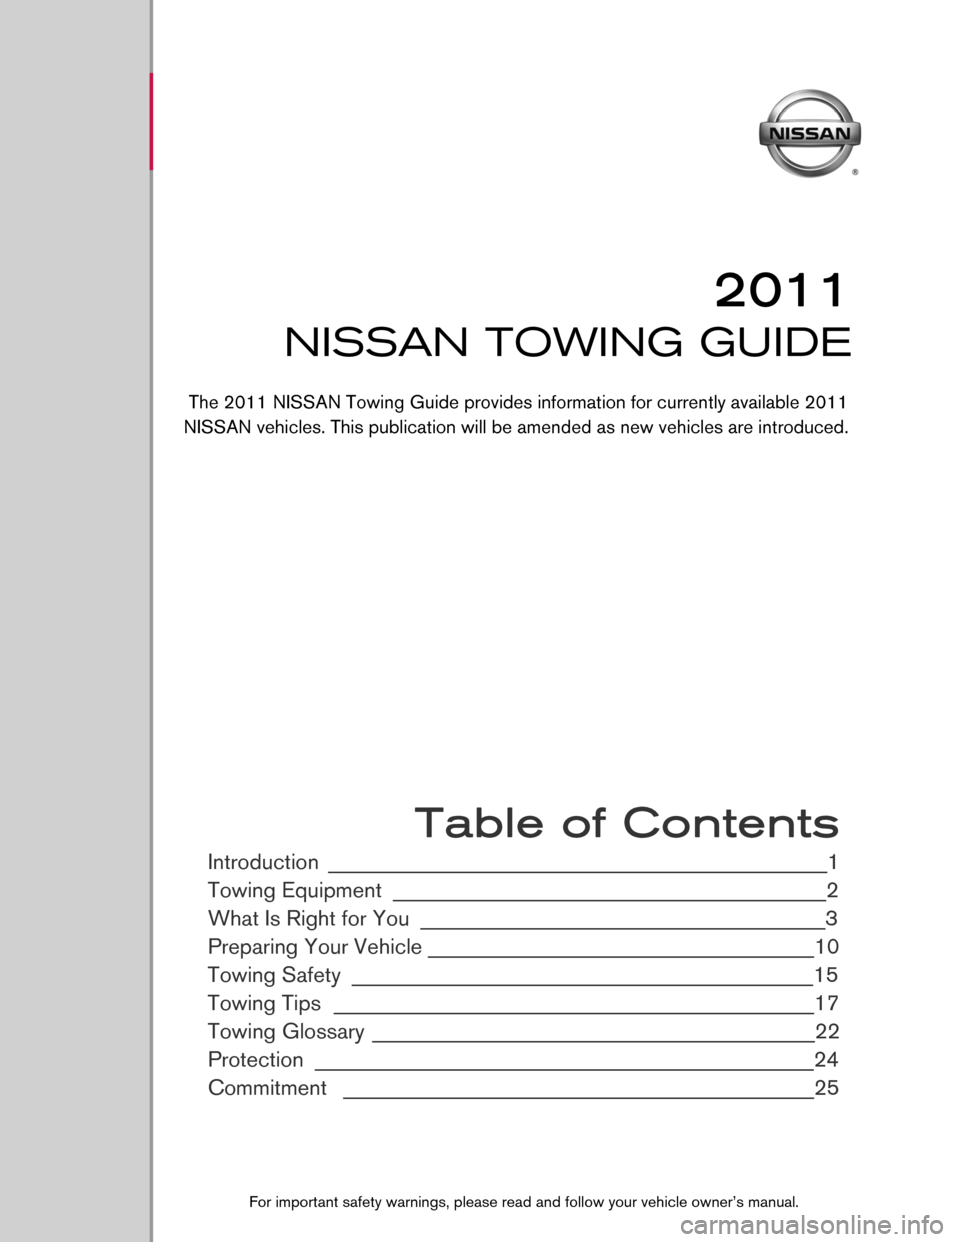 NISSAN XTERRA 2011 N50 / 2.G Towing Guide 9
2011
NISSAN TOWING GUIDE
 Table of Contents
Introduction _____________________________________________________1 
Towing Equipment
 ______________________________________________2 
What Is Right for 